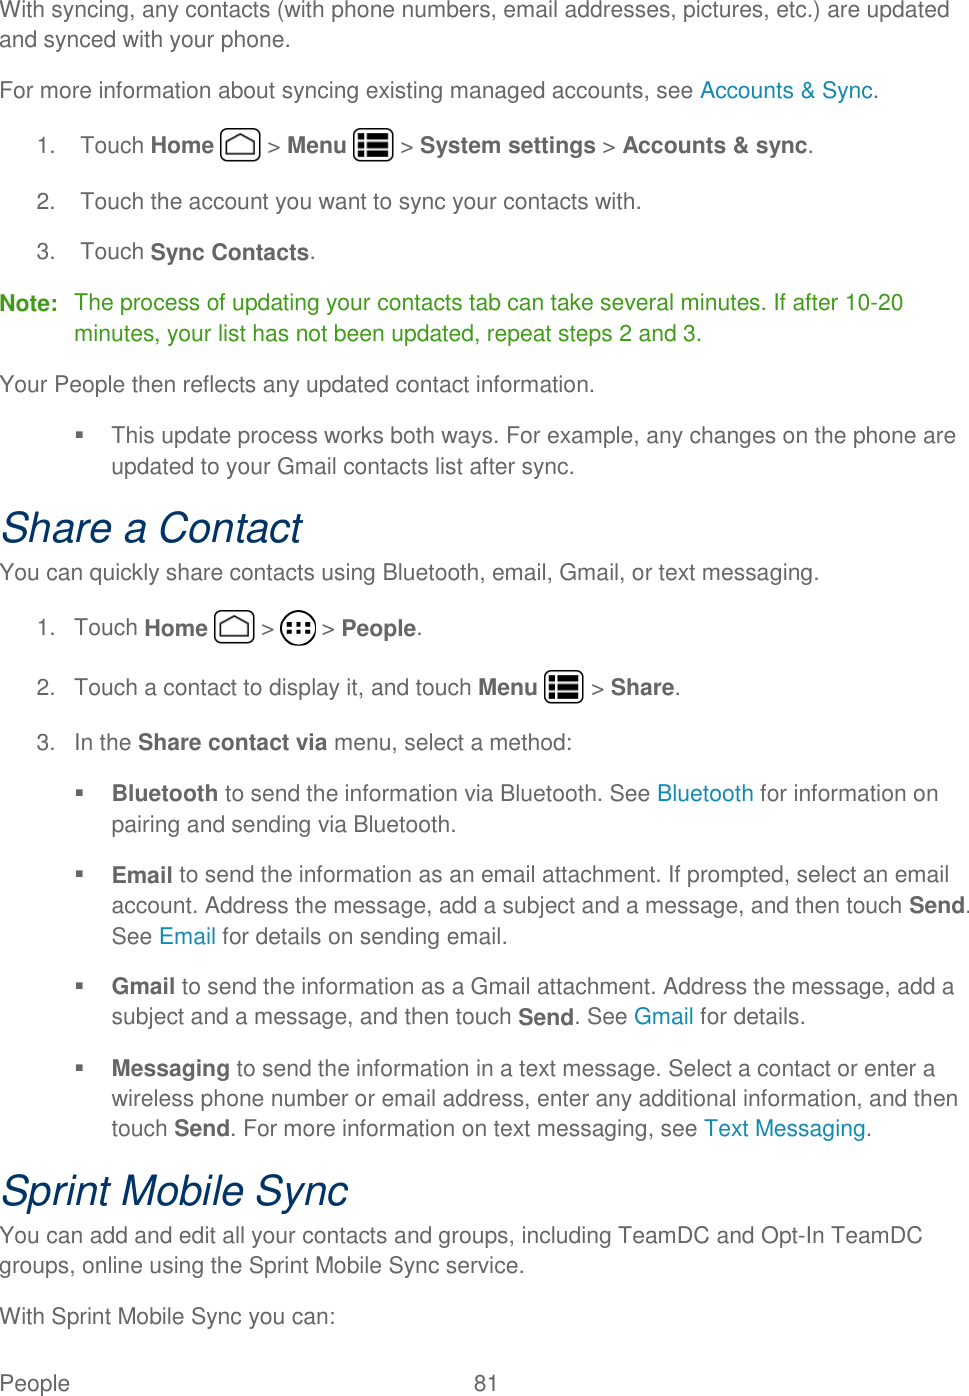 People  81   With syncing, any contacts (with phone numbers, email addresses, pictures, etc.) are updated and synced with your phone. For more information about syncing existing managed accounts, see Accounts &amp; Sync. 1.  Touch Home   &gt; Menu   &gt; System settings &gt; Accounts &amp; sync. 2.  Touch the account you want to sync your contacts with. 3.  Touch Sync Contacts. Note:  The process of updating your contacts tab can take several minutes. If after 10-20 minutes, your list has not been updated, repeat steps 2 and 3. Your People then reflects any updated contact information.   This update process works both ways. For example, any changes on the phone are updated to your Gmail contacts list after sync.  Share a Contact You can quickly share contacts using Bluetooth, email, Gmail, or text messaging. 1.  Touch Home   &gt;   &gt; People. 2.  Touch a contact to display it, and touch Menu   &gt; Share. 3.  In the Share contact via menu, select a method:  Bluetooth to send the information via Bluetooth. See Bluetooth for information on pairing and sending via Bluetooth.  Email to send the information as an email attachment. If prompted, select an email account. Address the message, add a subject and a message, and then touch Send. See Email for details on sending email.  Gmail to send the information as a Gmail attachment. Address the message, add a subject and a message, and then touch Send. See Gmail for details.  Messaging to send the information in a text message. Select a contact or enter a wireless phone number or email address, enter any additional information, and then touch Send. For more information on text messaging, see Text Messaging. Sprint Mobile Sync You can add and edit all your contacts and groups, including TeamDC and Opt-In TeamDC groups, online using the Sprint Mobile Sync service. With Sprint Mobile Sync you can: 